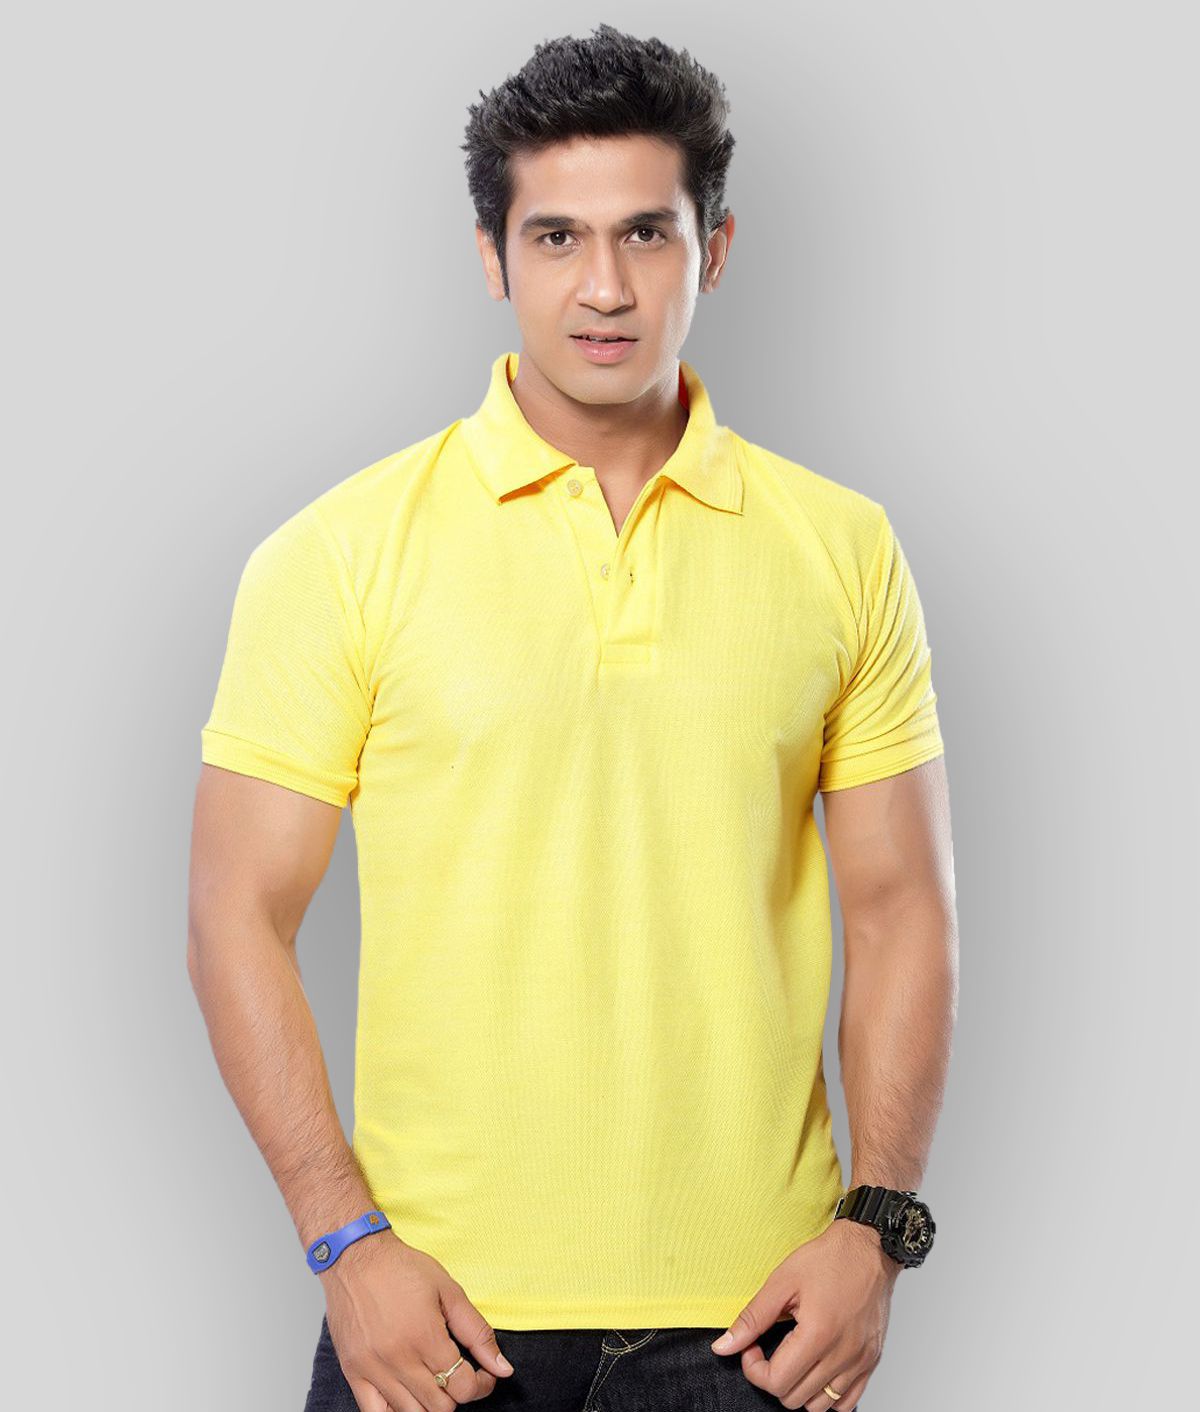 in365 - Yellow Cotton Blend Regular Fit Men's Polo T Shirt ( Pack of 1 )